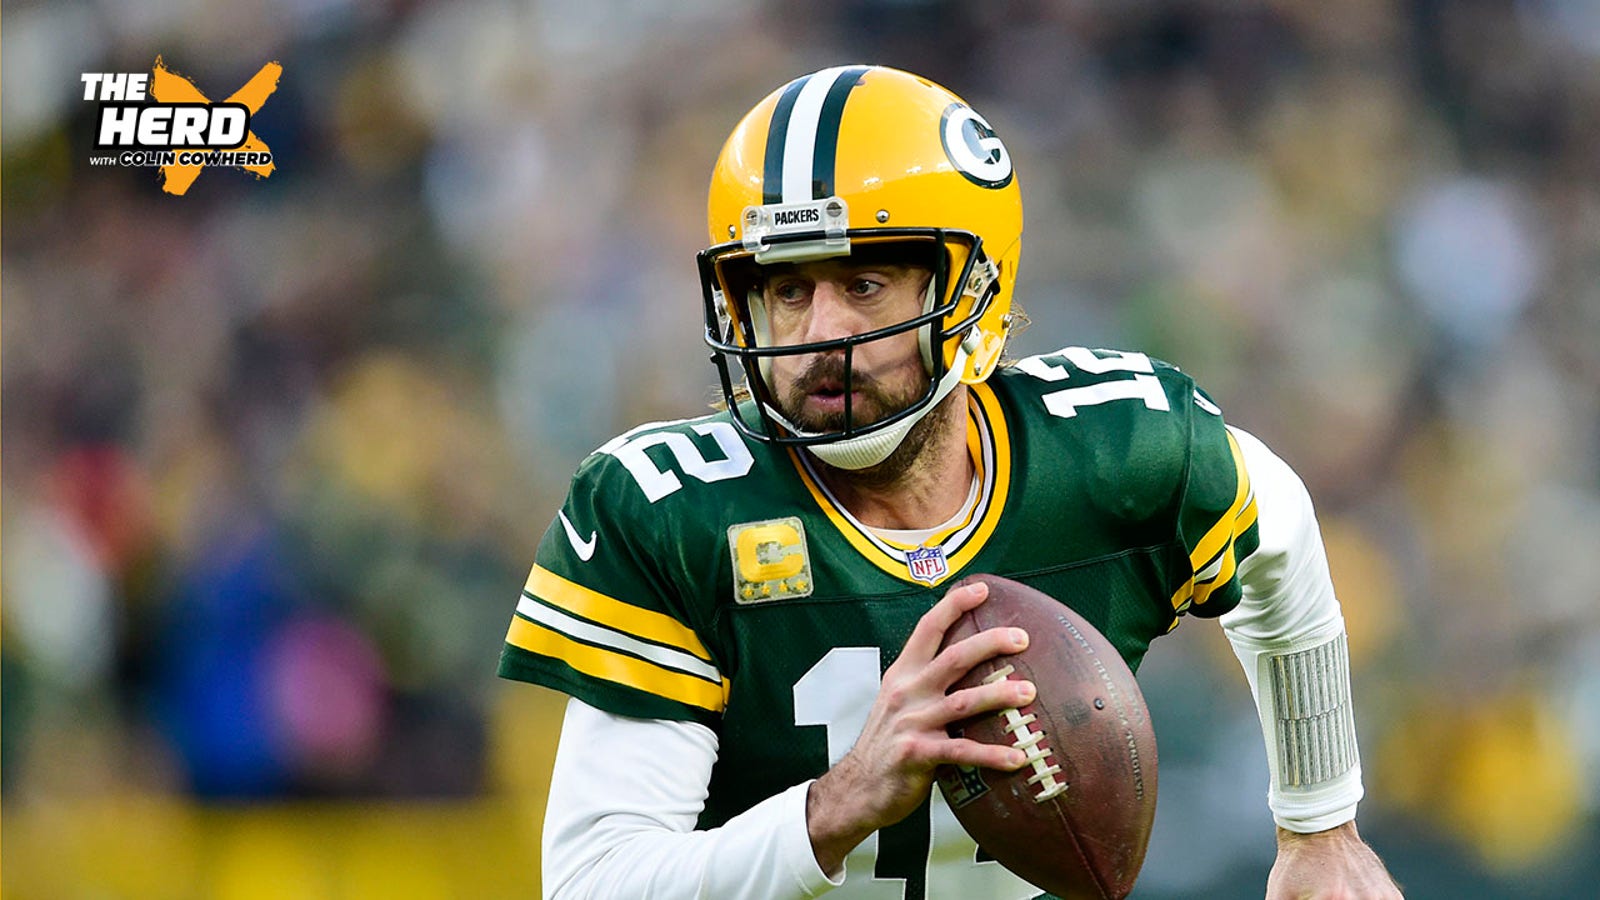 Aaron Rodgers says he has no decision on his future in Green Bay